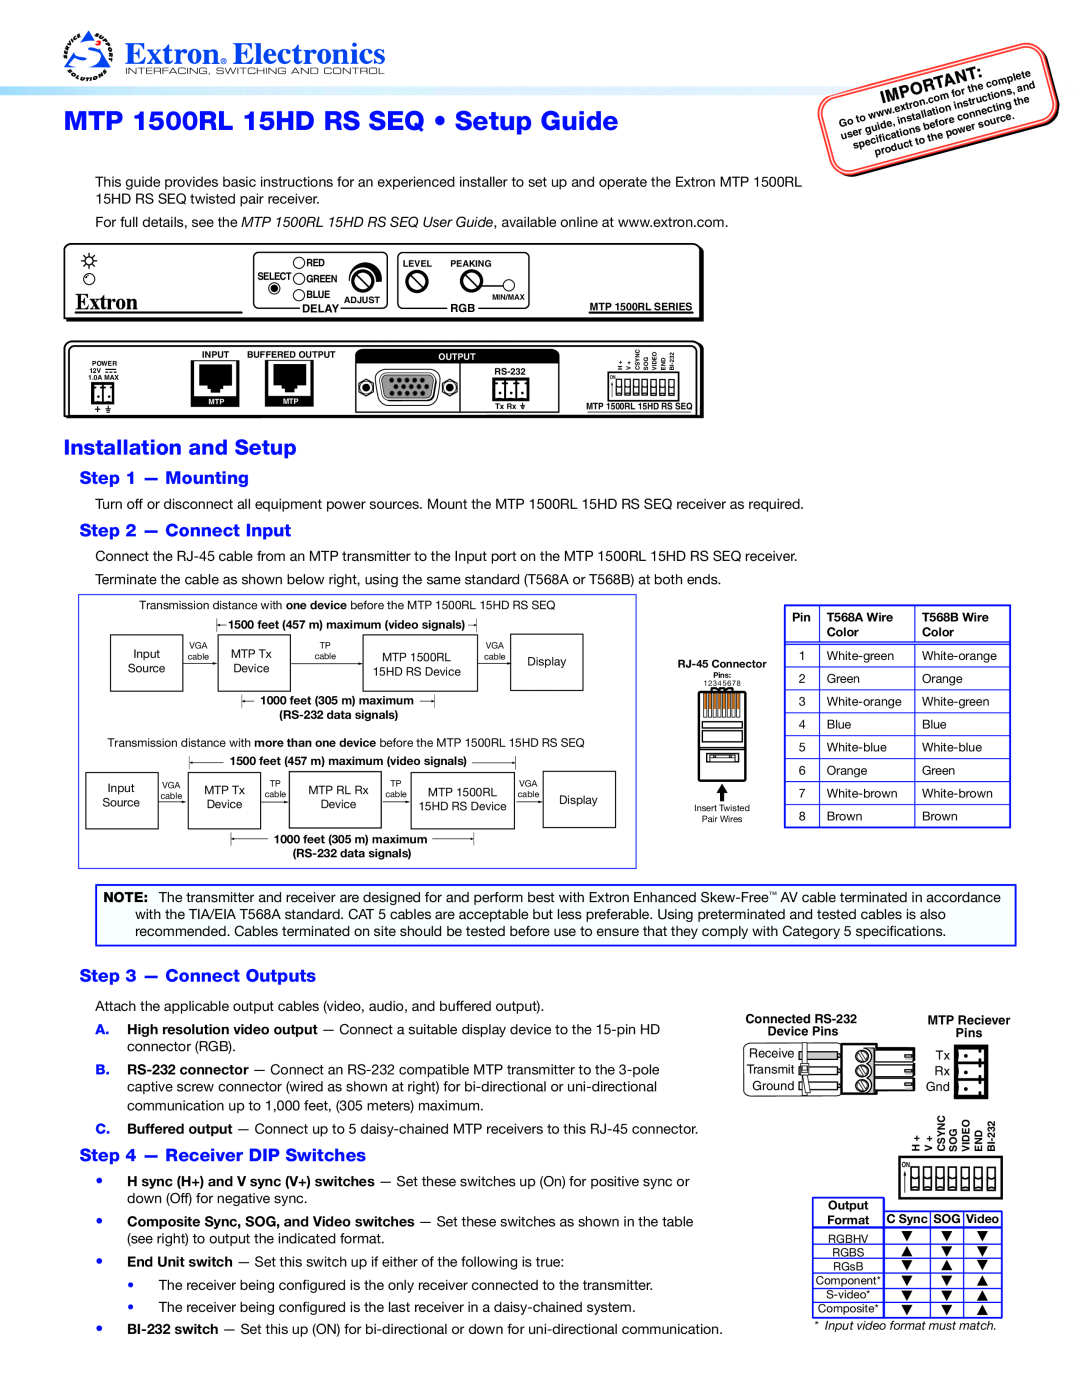 Extron electronic installation instructions MTP 1500RL 15HD RS SEQ Setup Guide, Mounting, Connect Input, IMPOR.com 